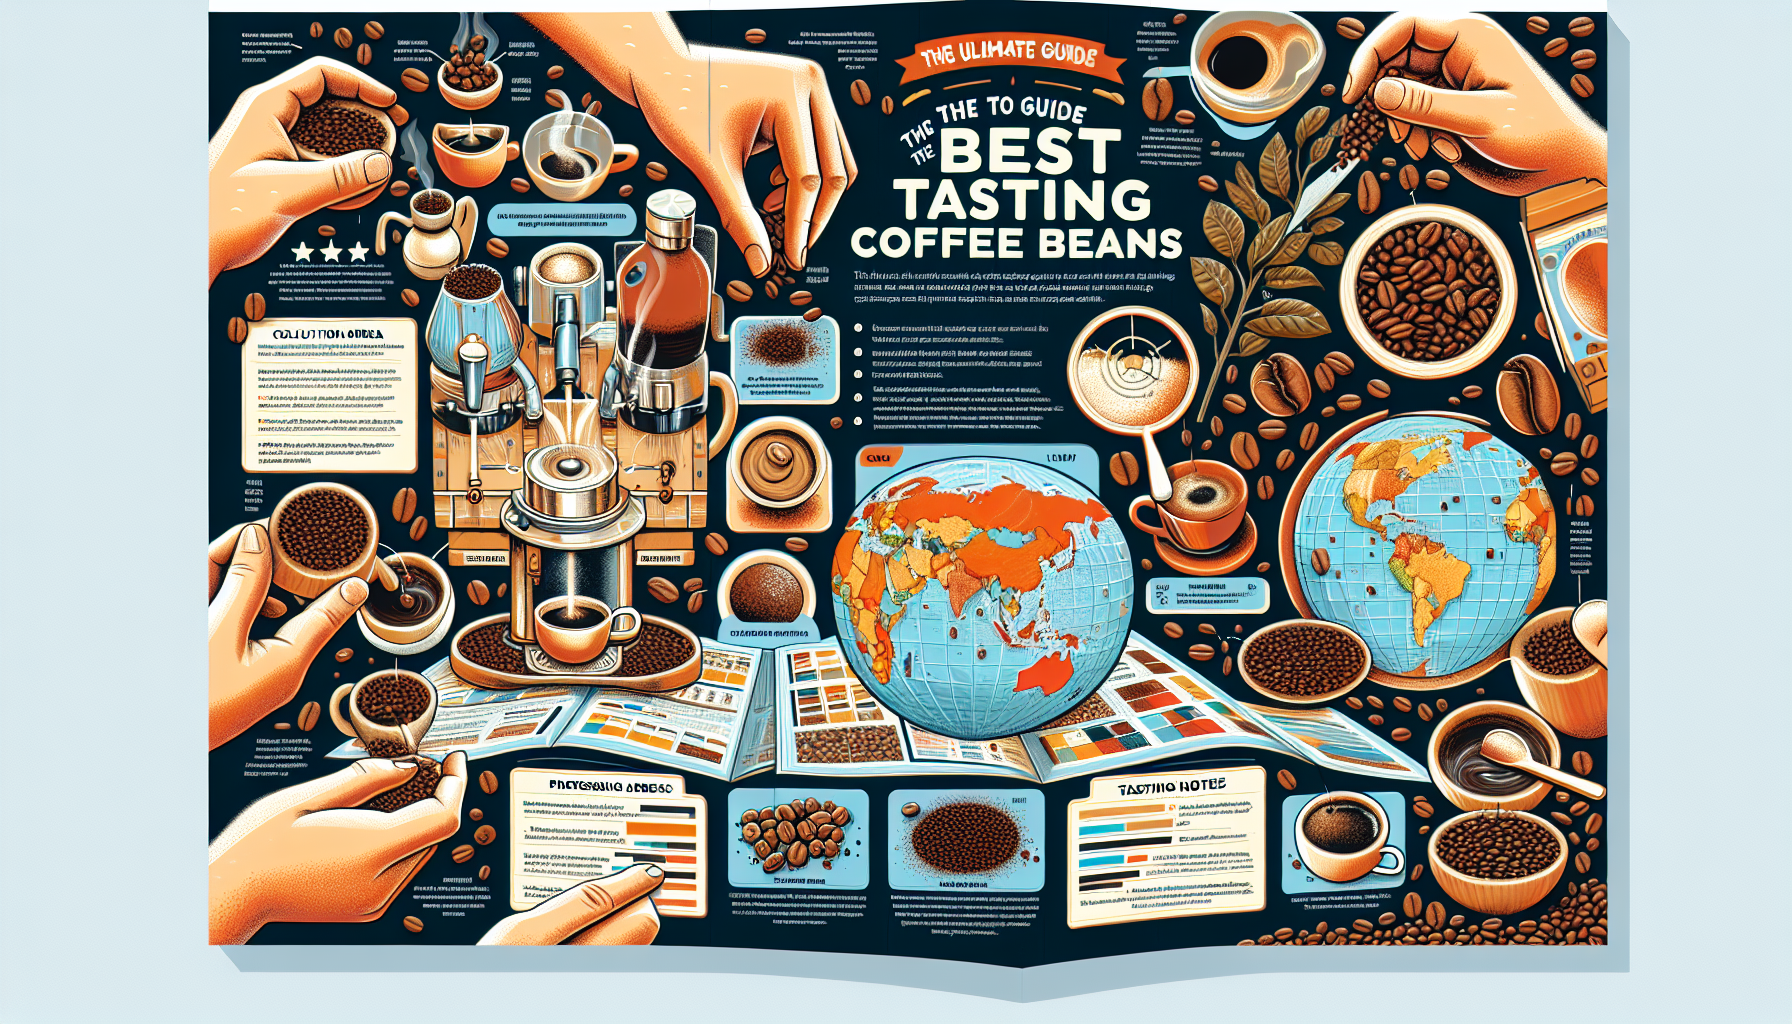 An illustrative and colorful guide for the best tasting coffee beans. It includes multiple sections detailing the cultivation areas, processing methods, roasting techniques, and tasting notes of the t